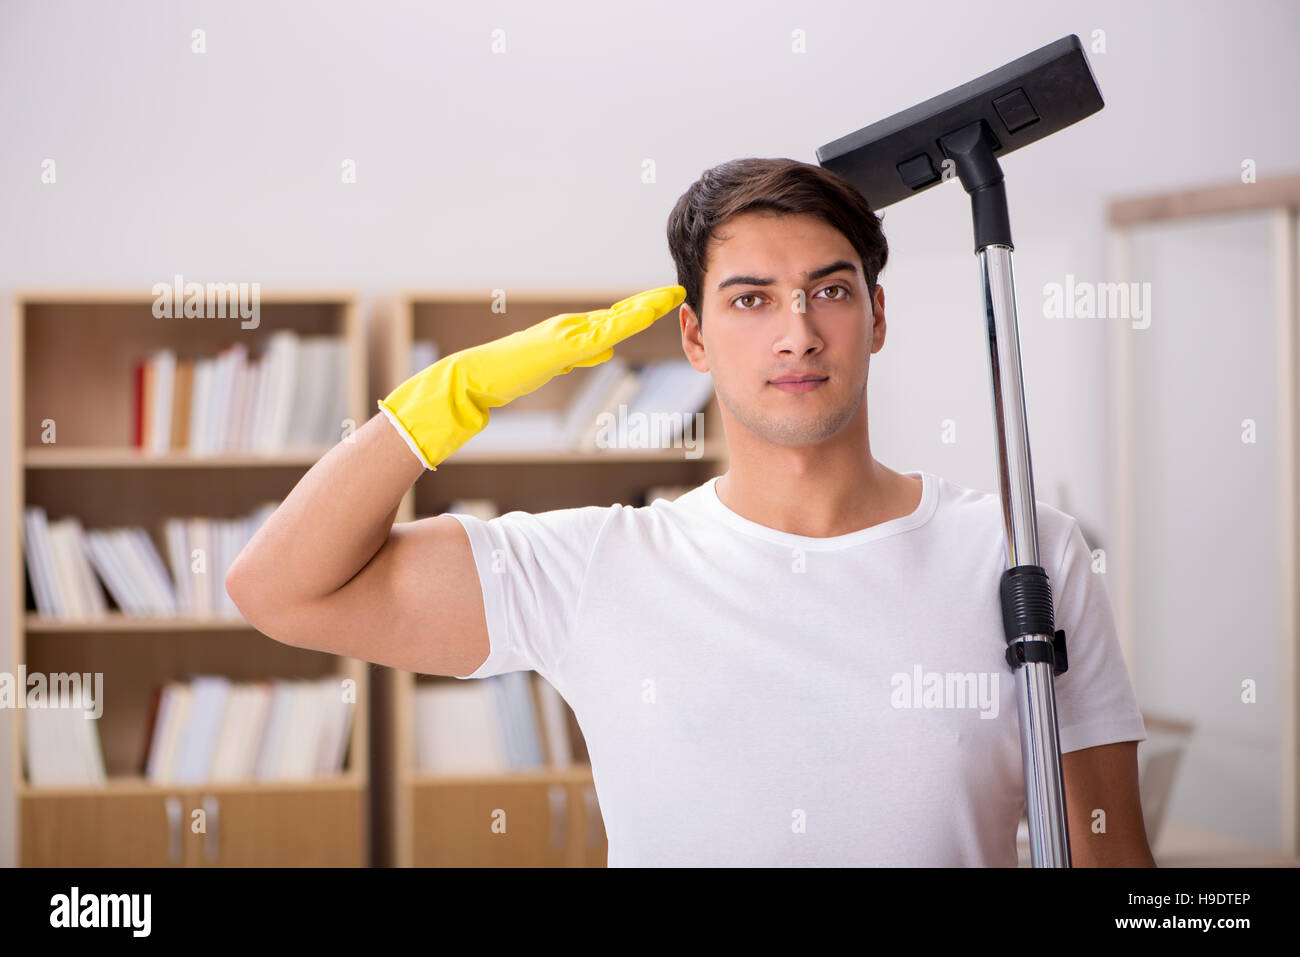 Man Cleaning Home With Vacuum Cleaner Stock Photo Alamy